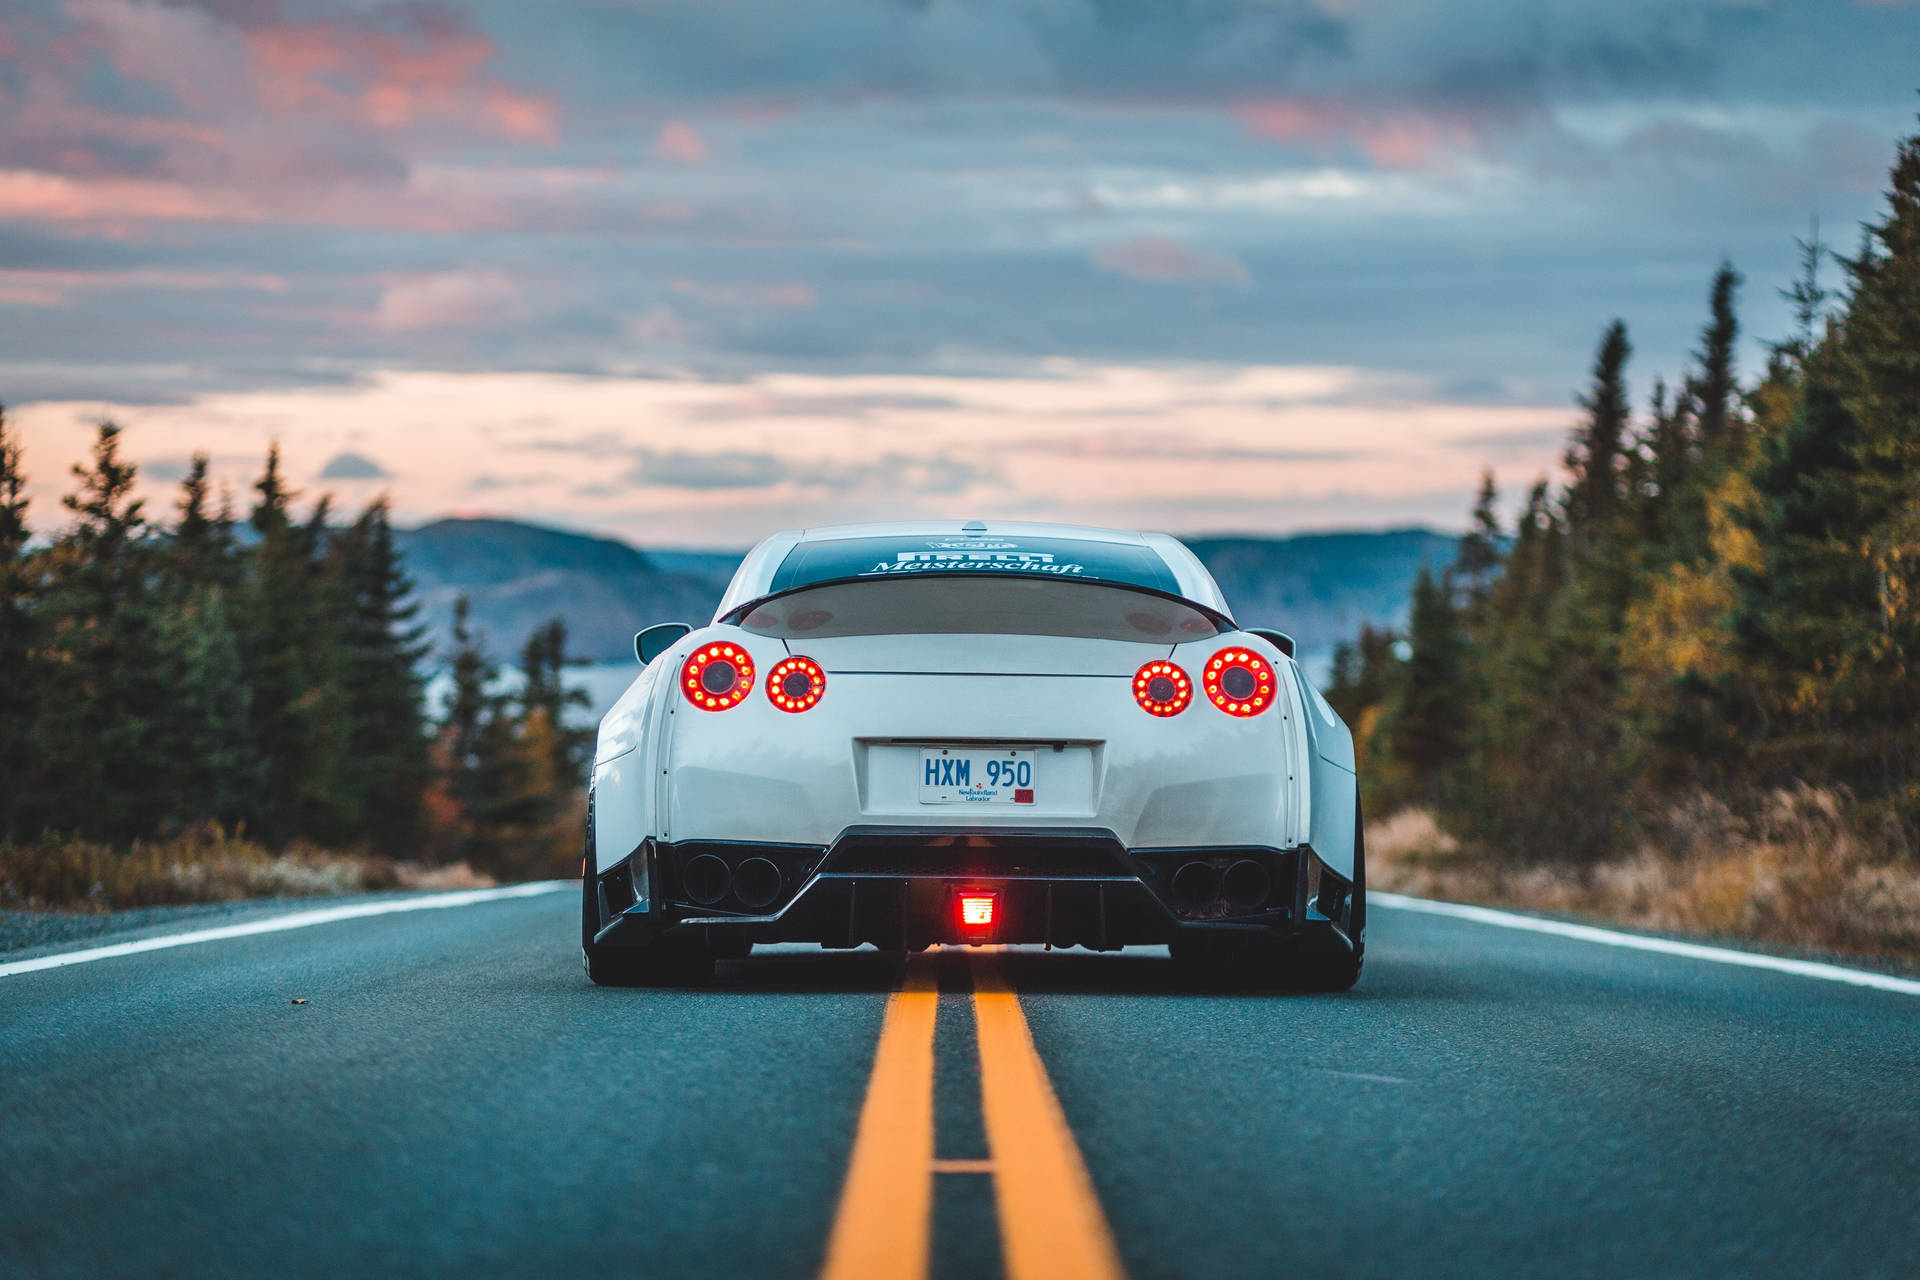 "Aesthetic Nissan GT-R Gliding Through The Night" Wallpaper